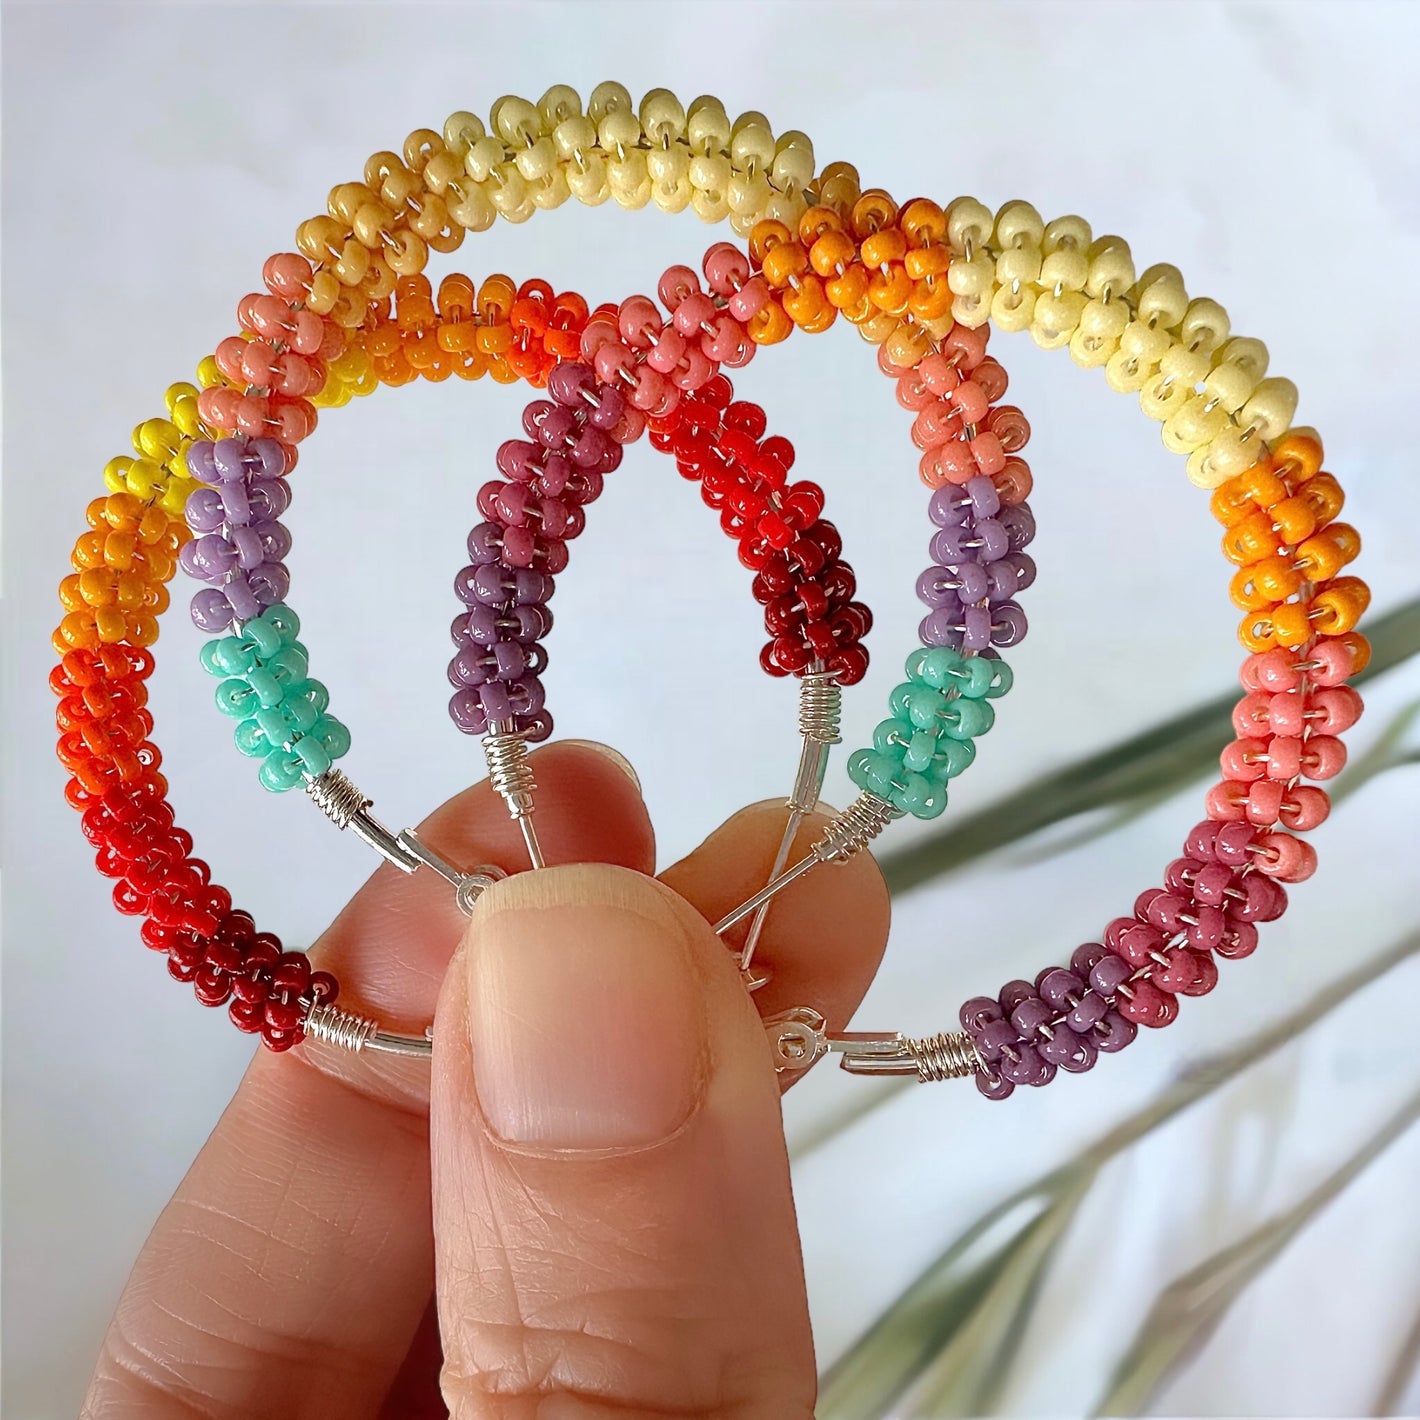 Wire-wrapped beaded hoop earrings in sunset and sunrise patterns made with 11/0 Miyuki seed beads